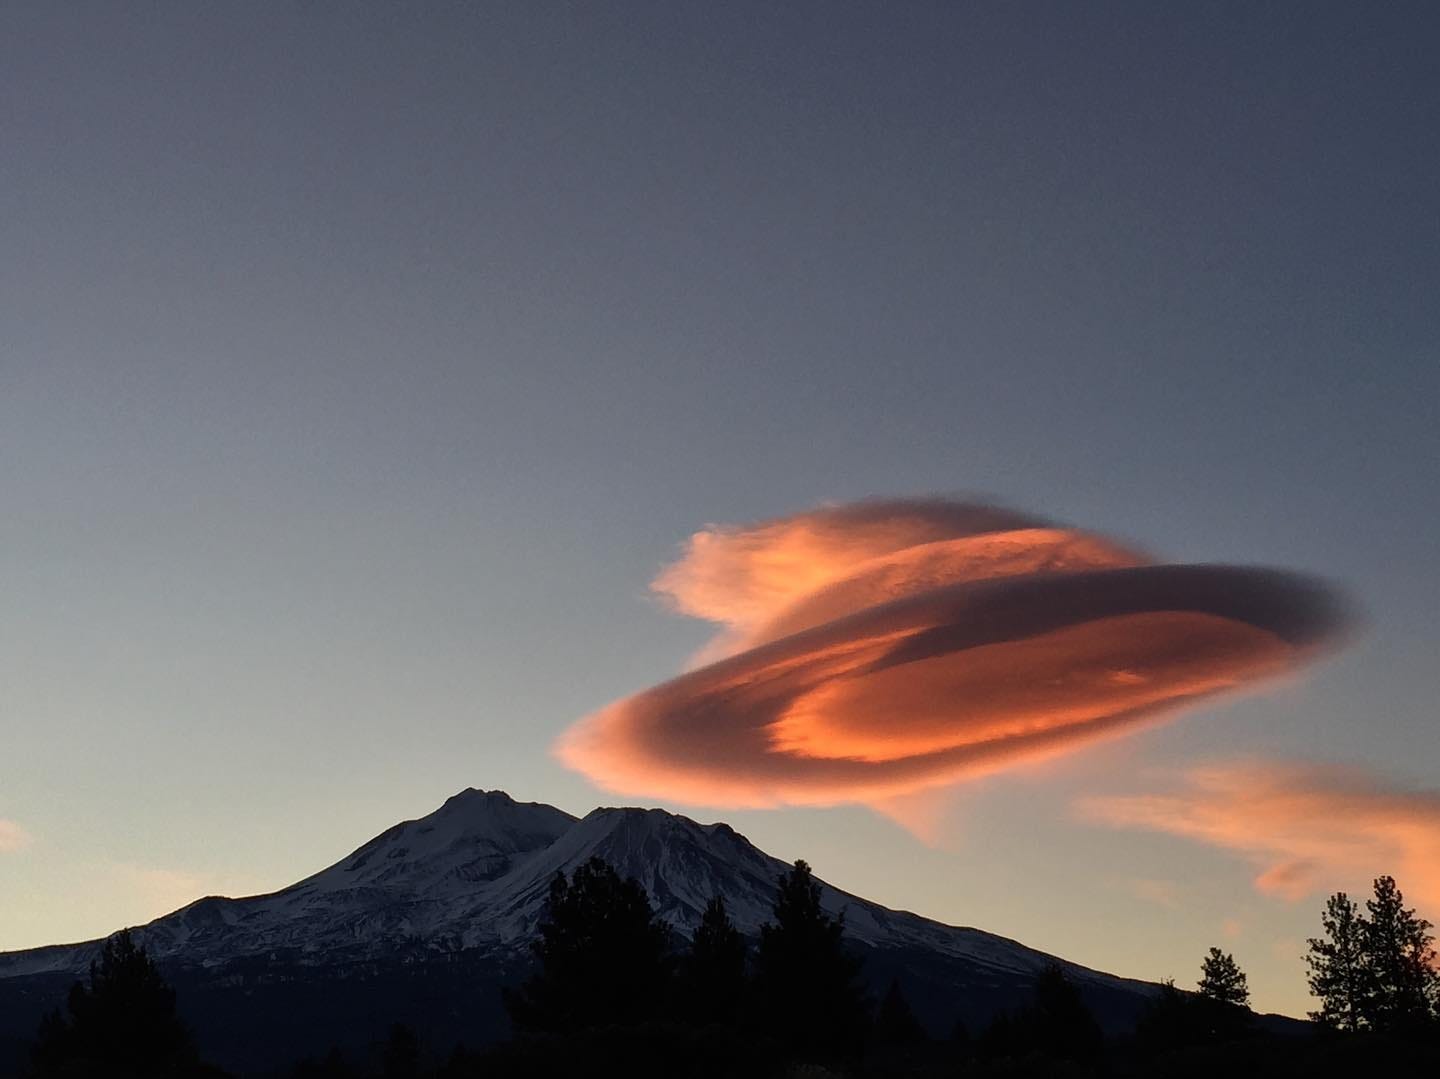 A lenticular cloud resembles a witch's hat over Mt. Shasta in this photo submitted by Cathy Casey in 2020.